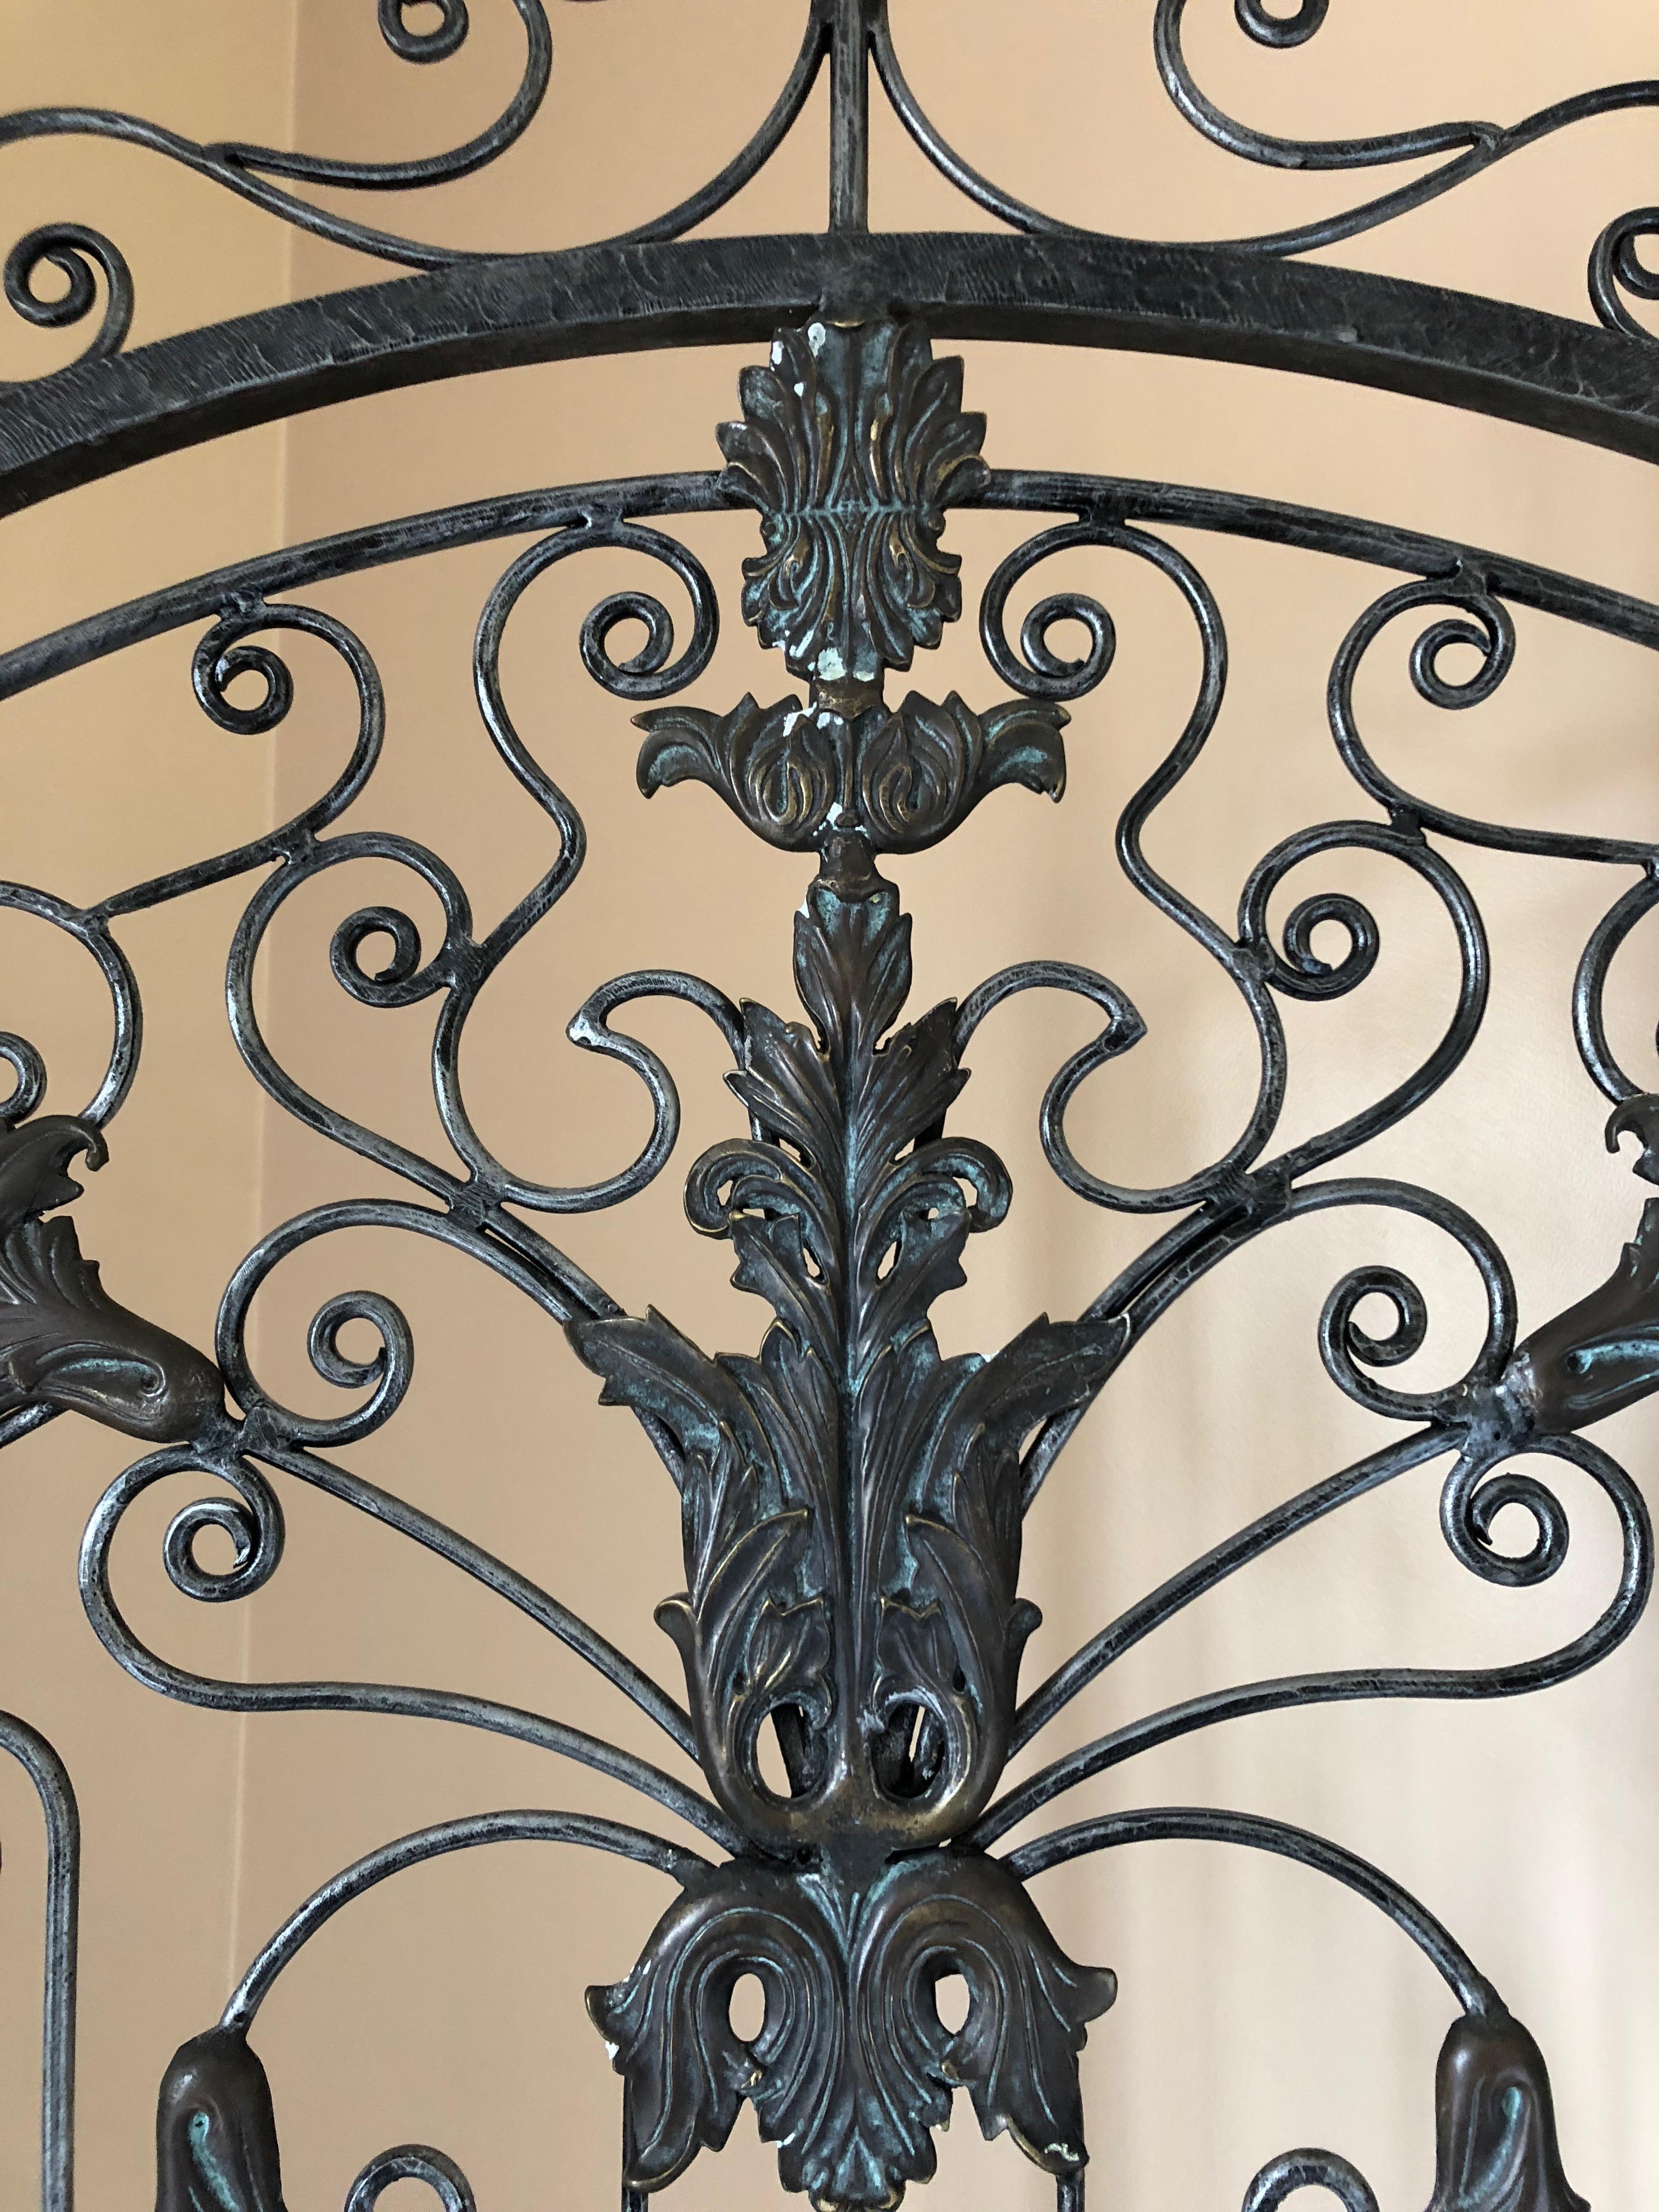 Stunning 2-panel painted iron screen in silvery black with ornate bronze mounts. Each panel is 26.25 W
Doesn't open completely flat, so not meant to be hung on a wall.